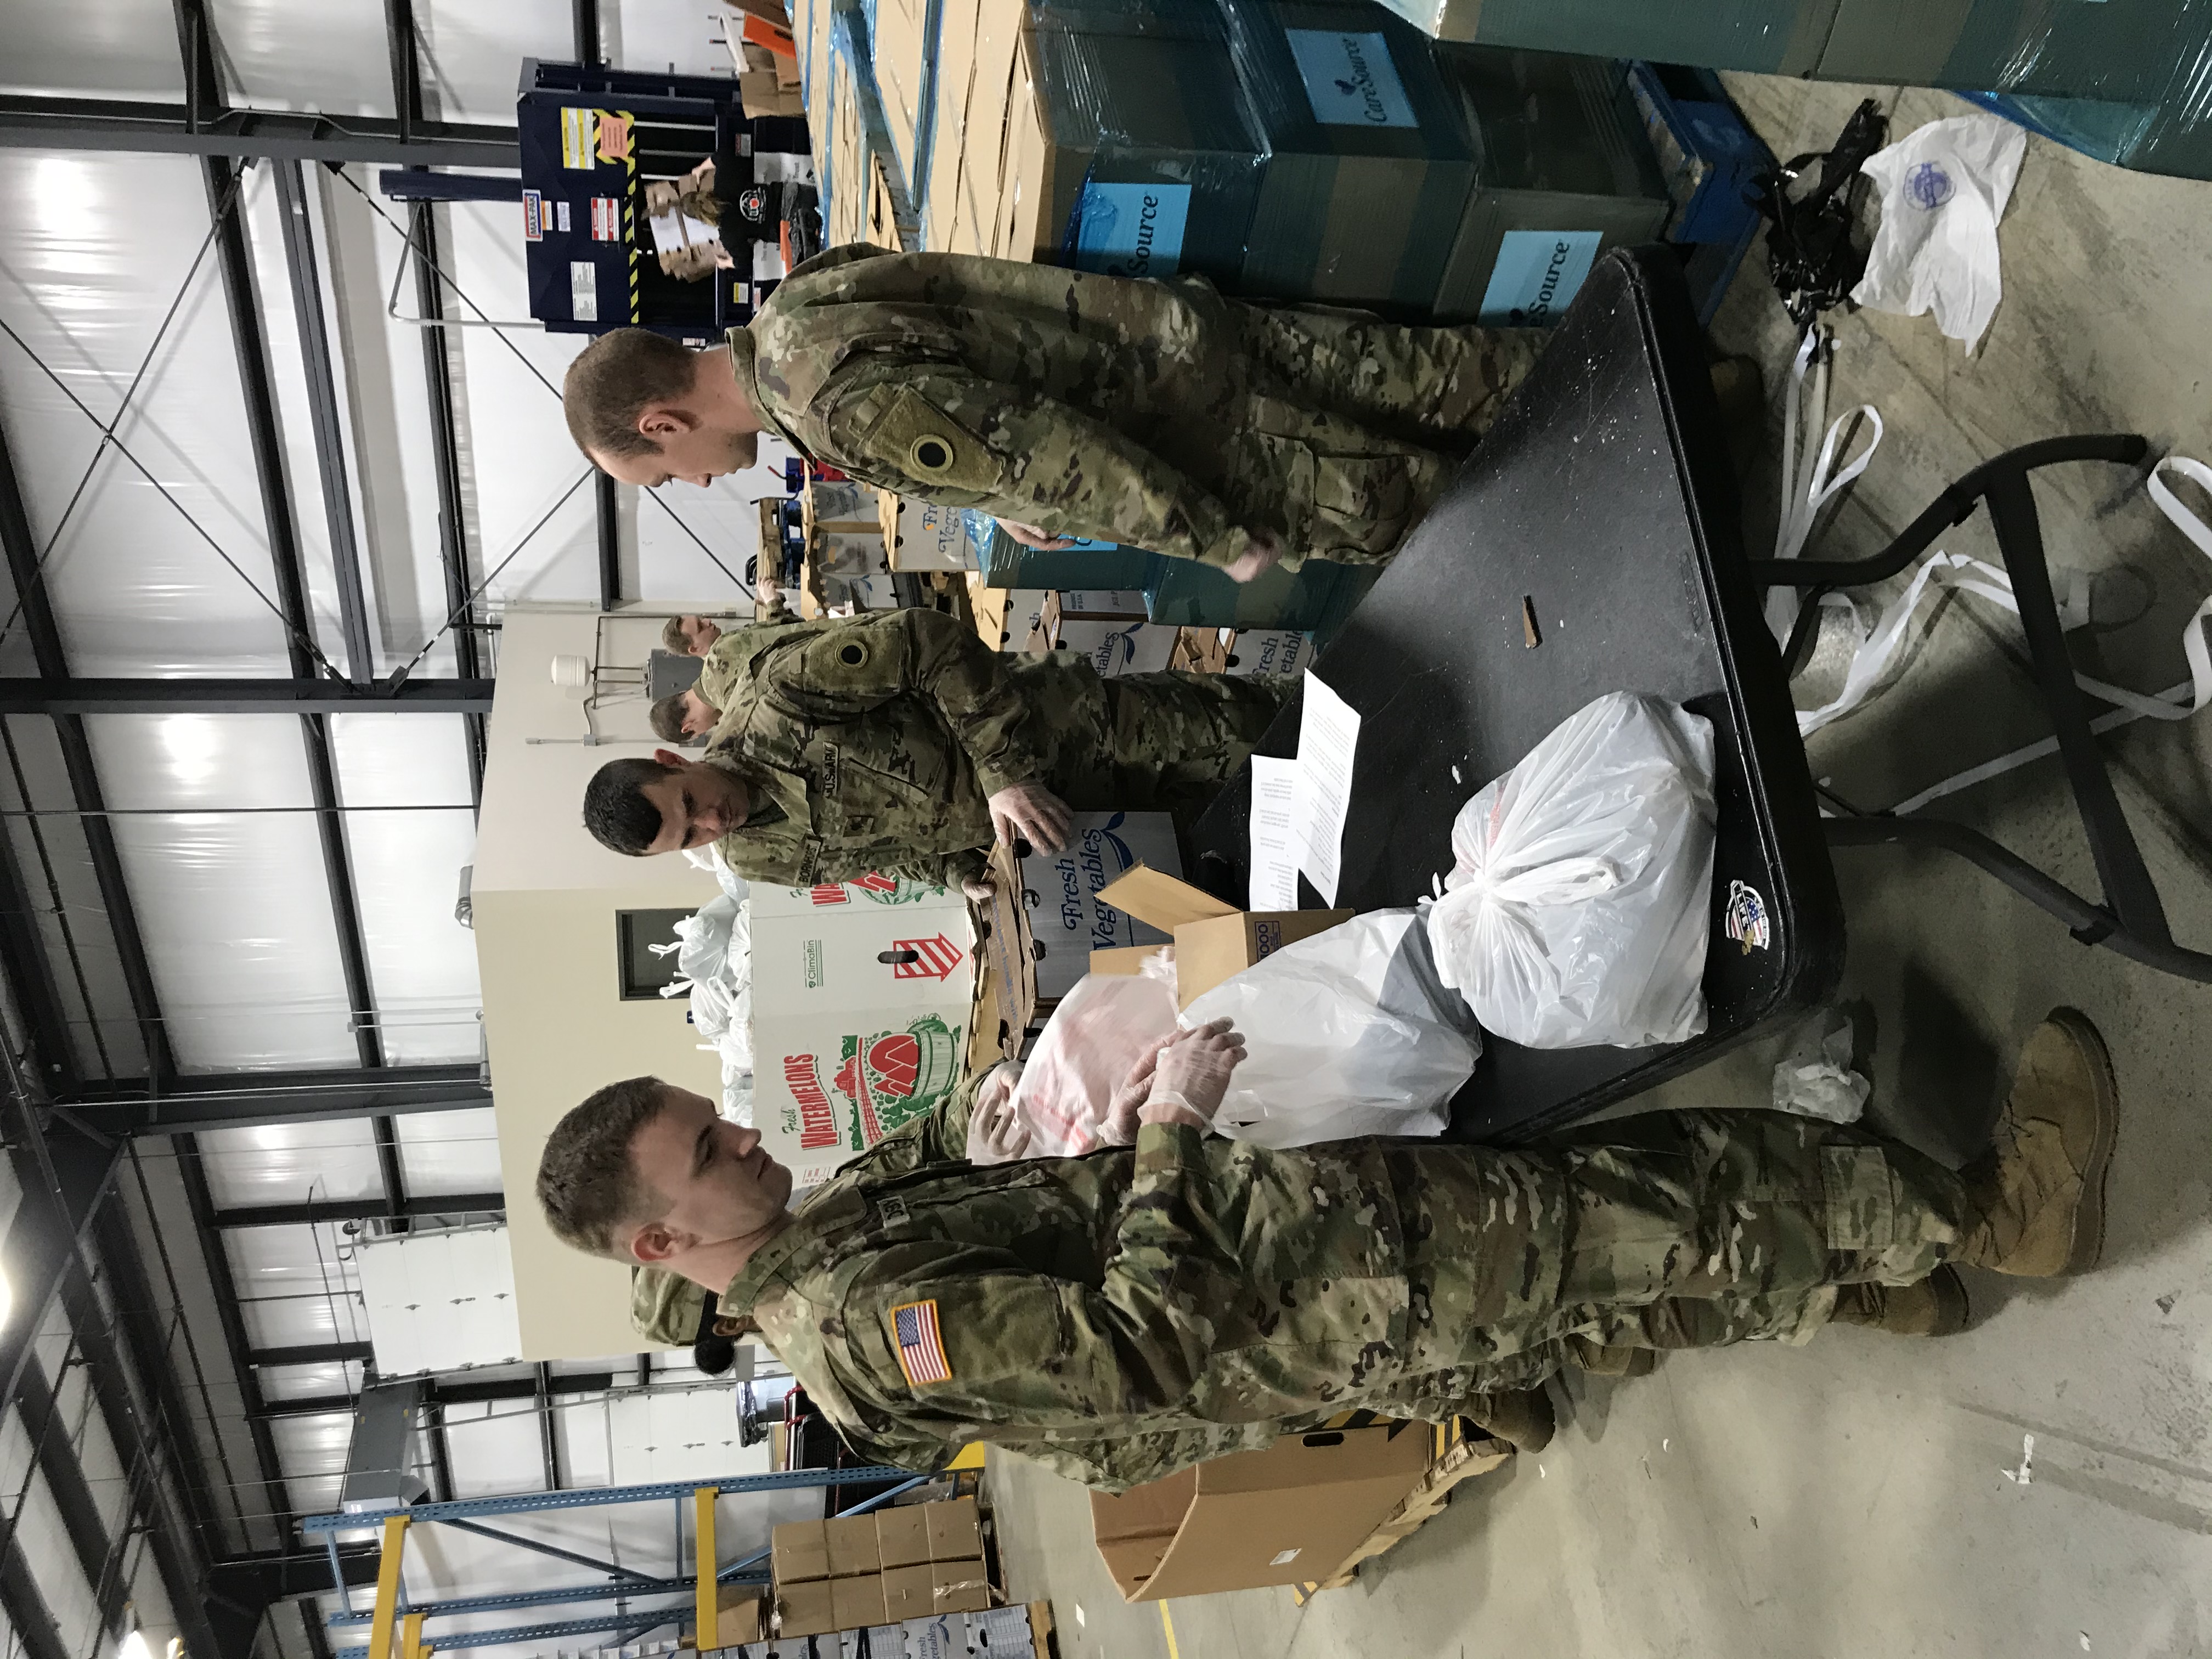 Soldiers pack fresh vegetables into bags inside warehouse.